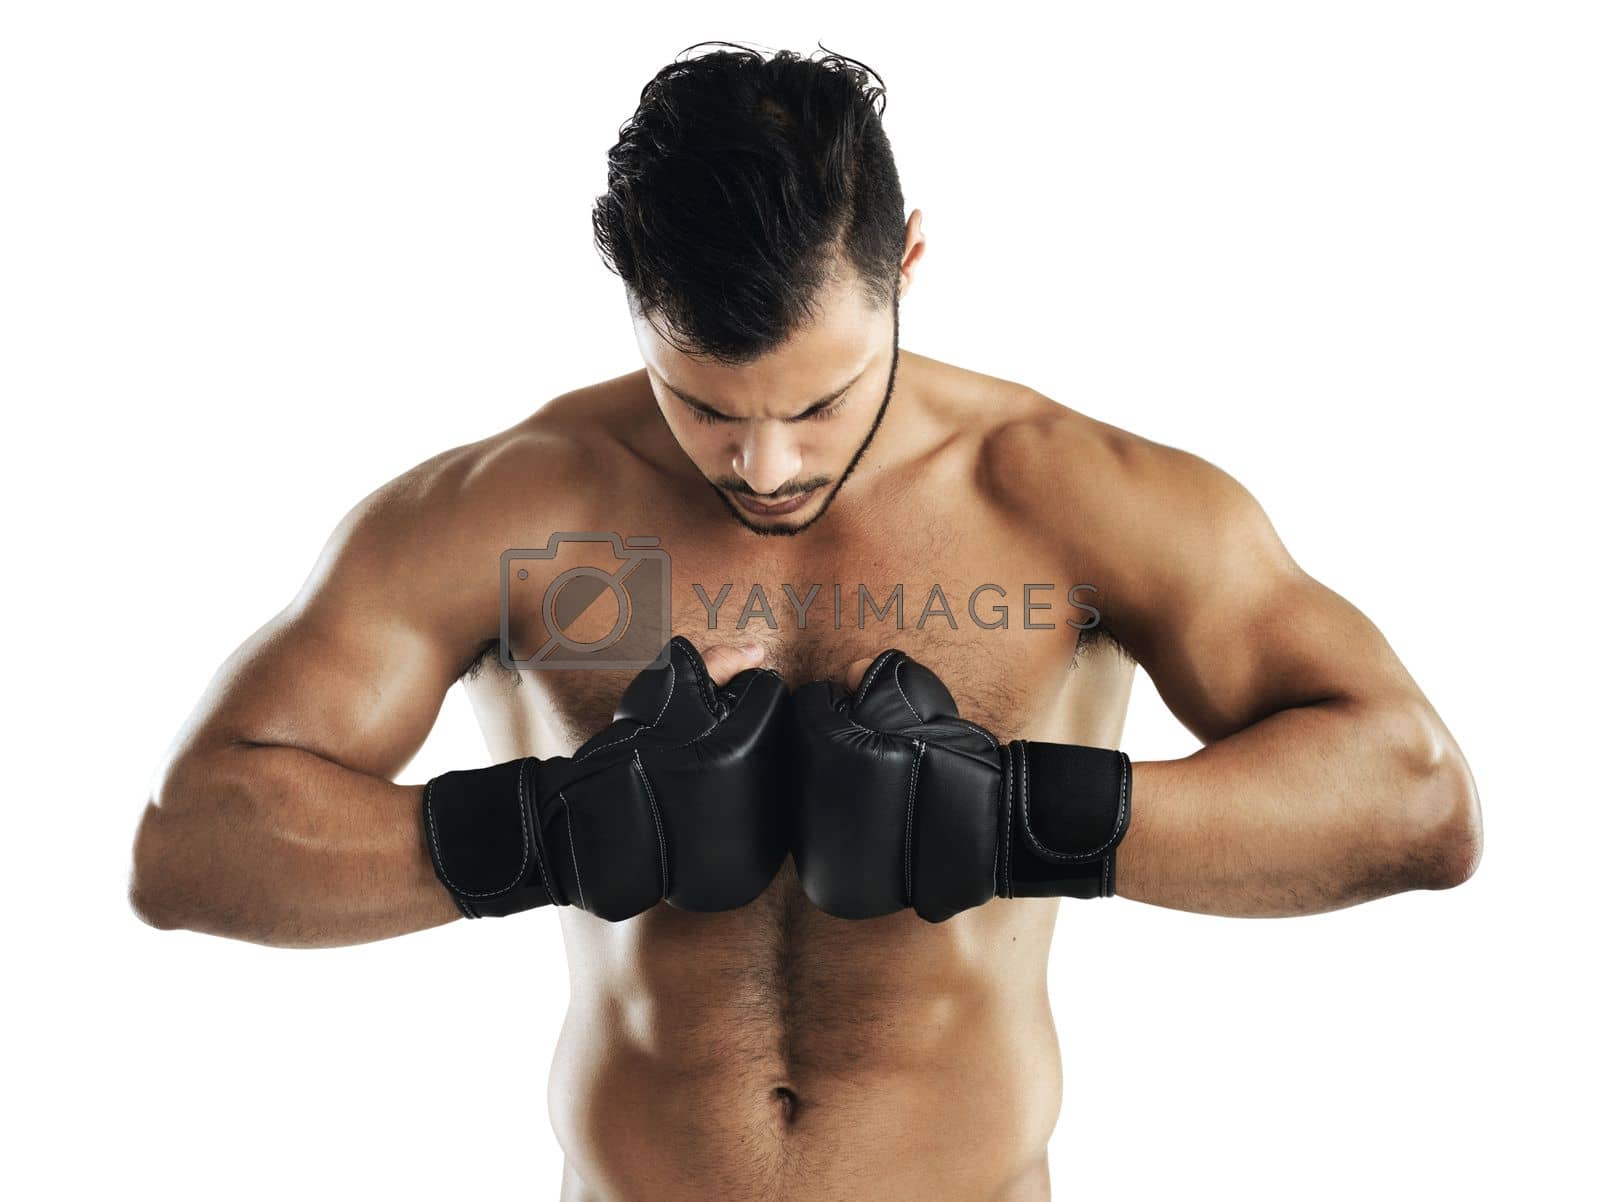 Royalty free image of Hes in it to win it. Studio shot of a fit young man wearing boxing gloves against a white background. by YuriArcurs